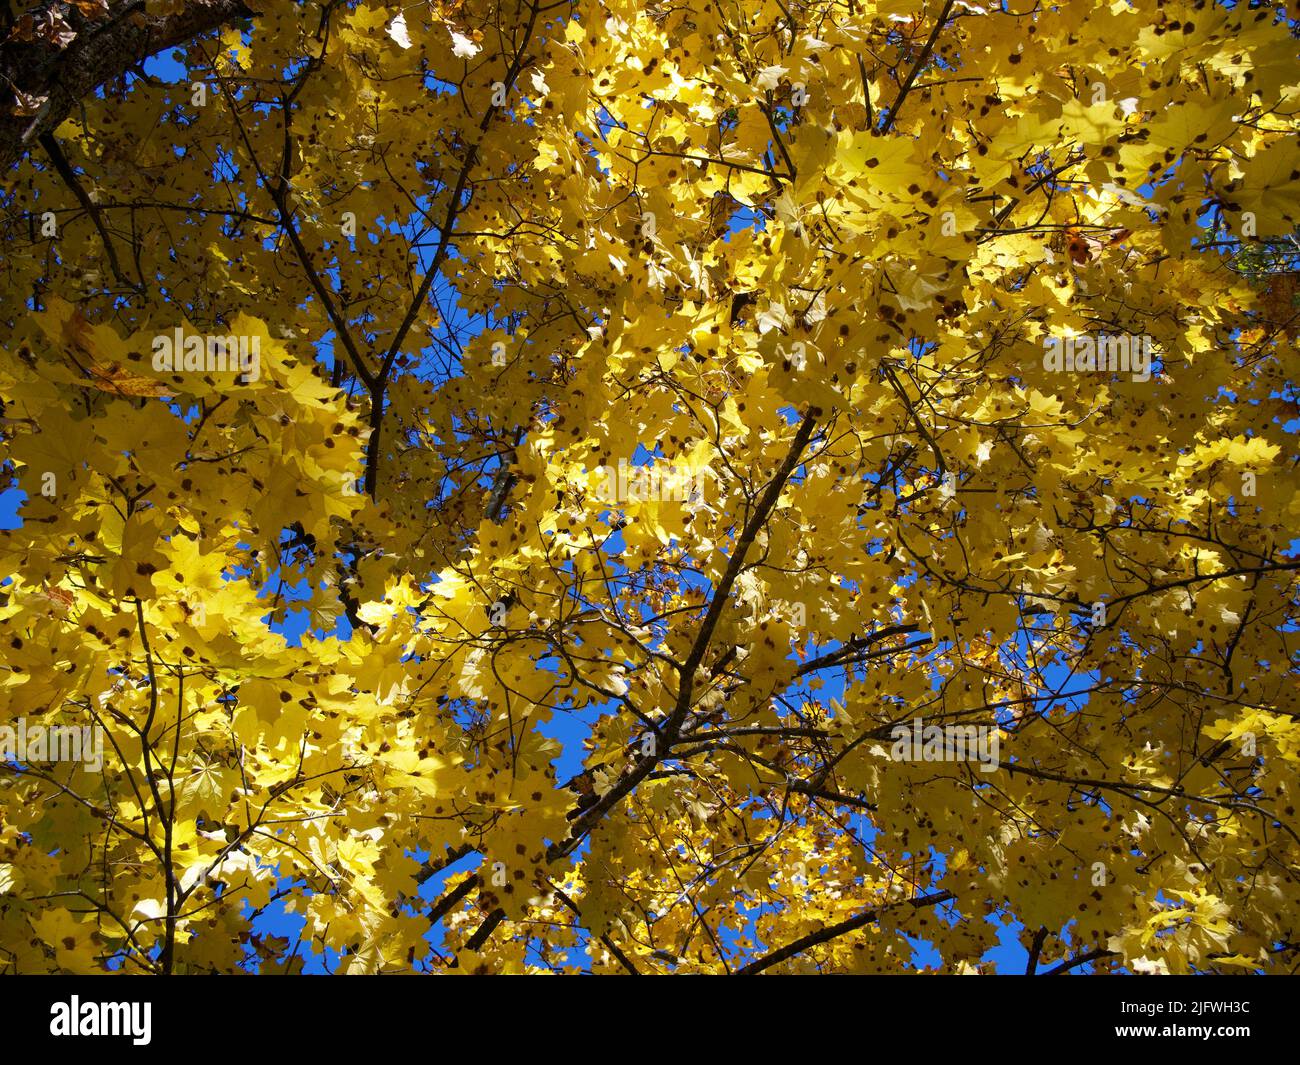 There are many golden maple leaves on the branches of the tree.  Beautiful autumn maple leaves in sunlight. Autumn forest natural landscape. Stock Photo